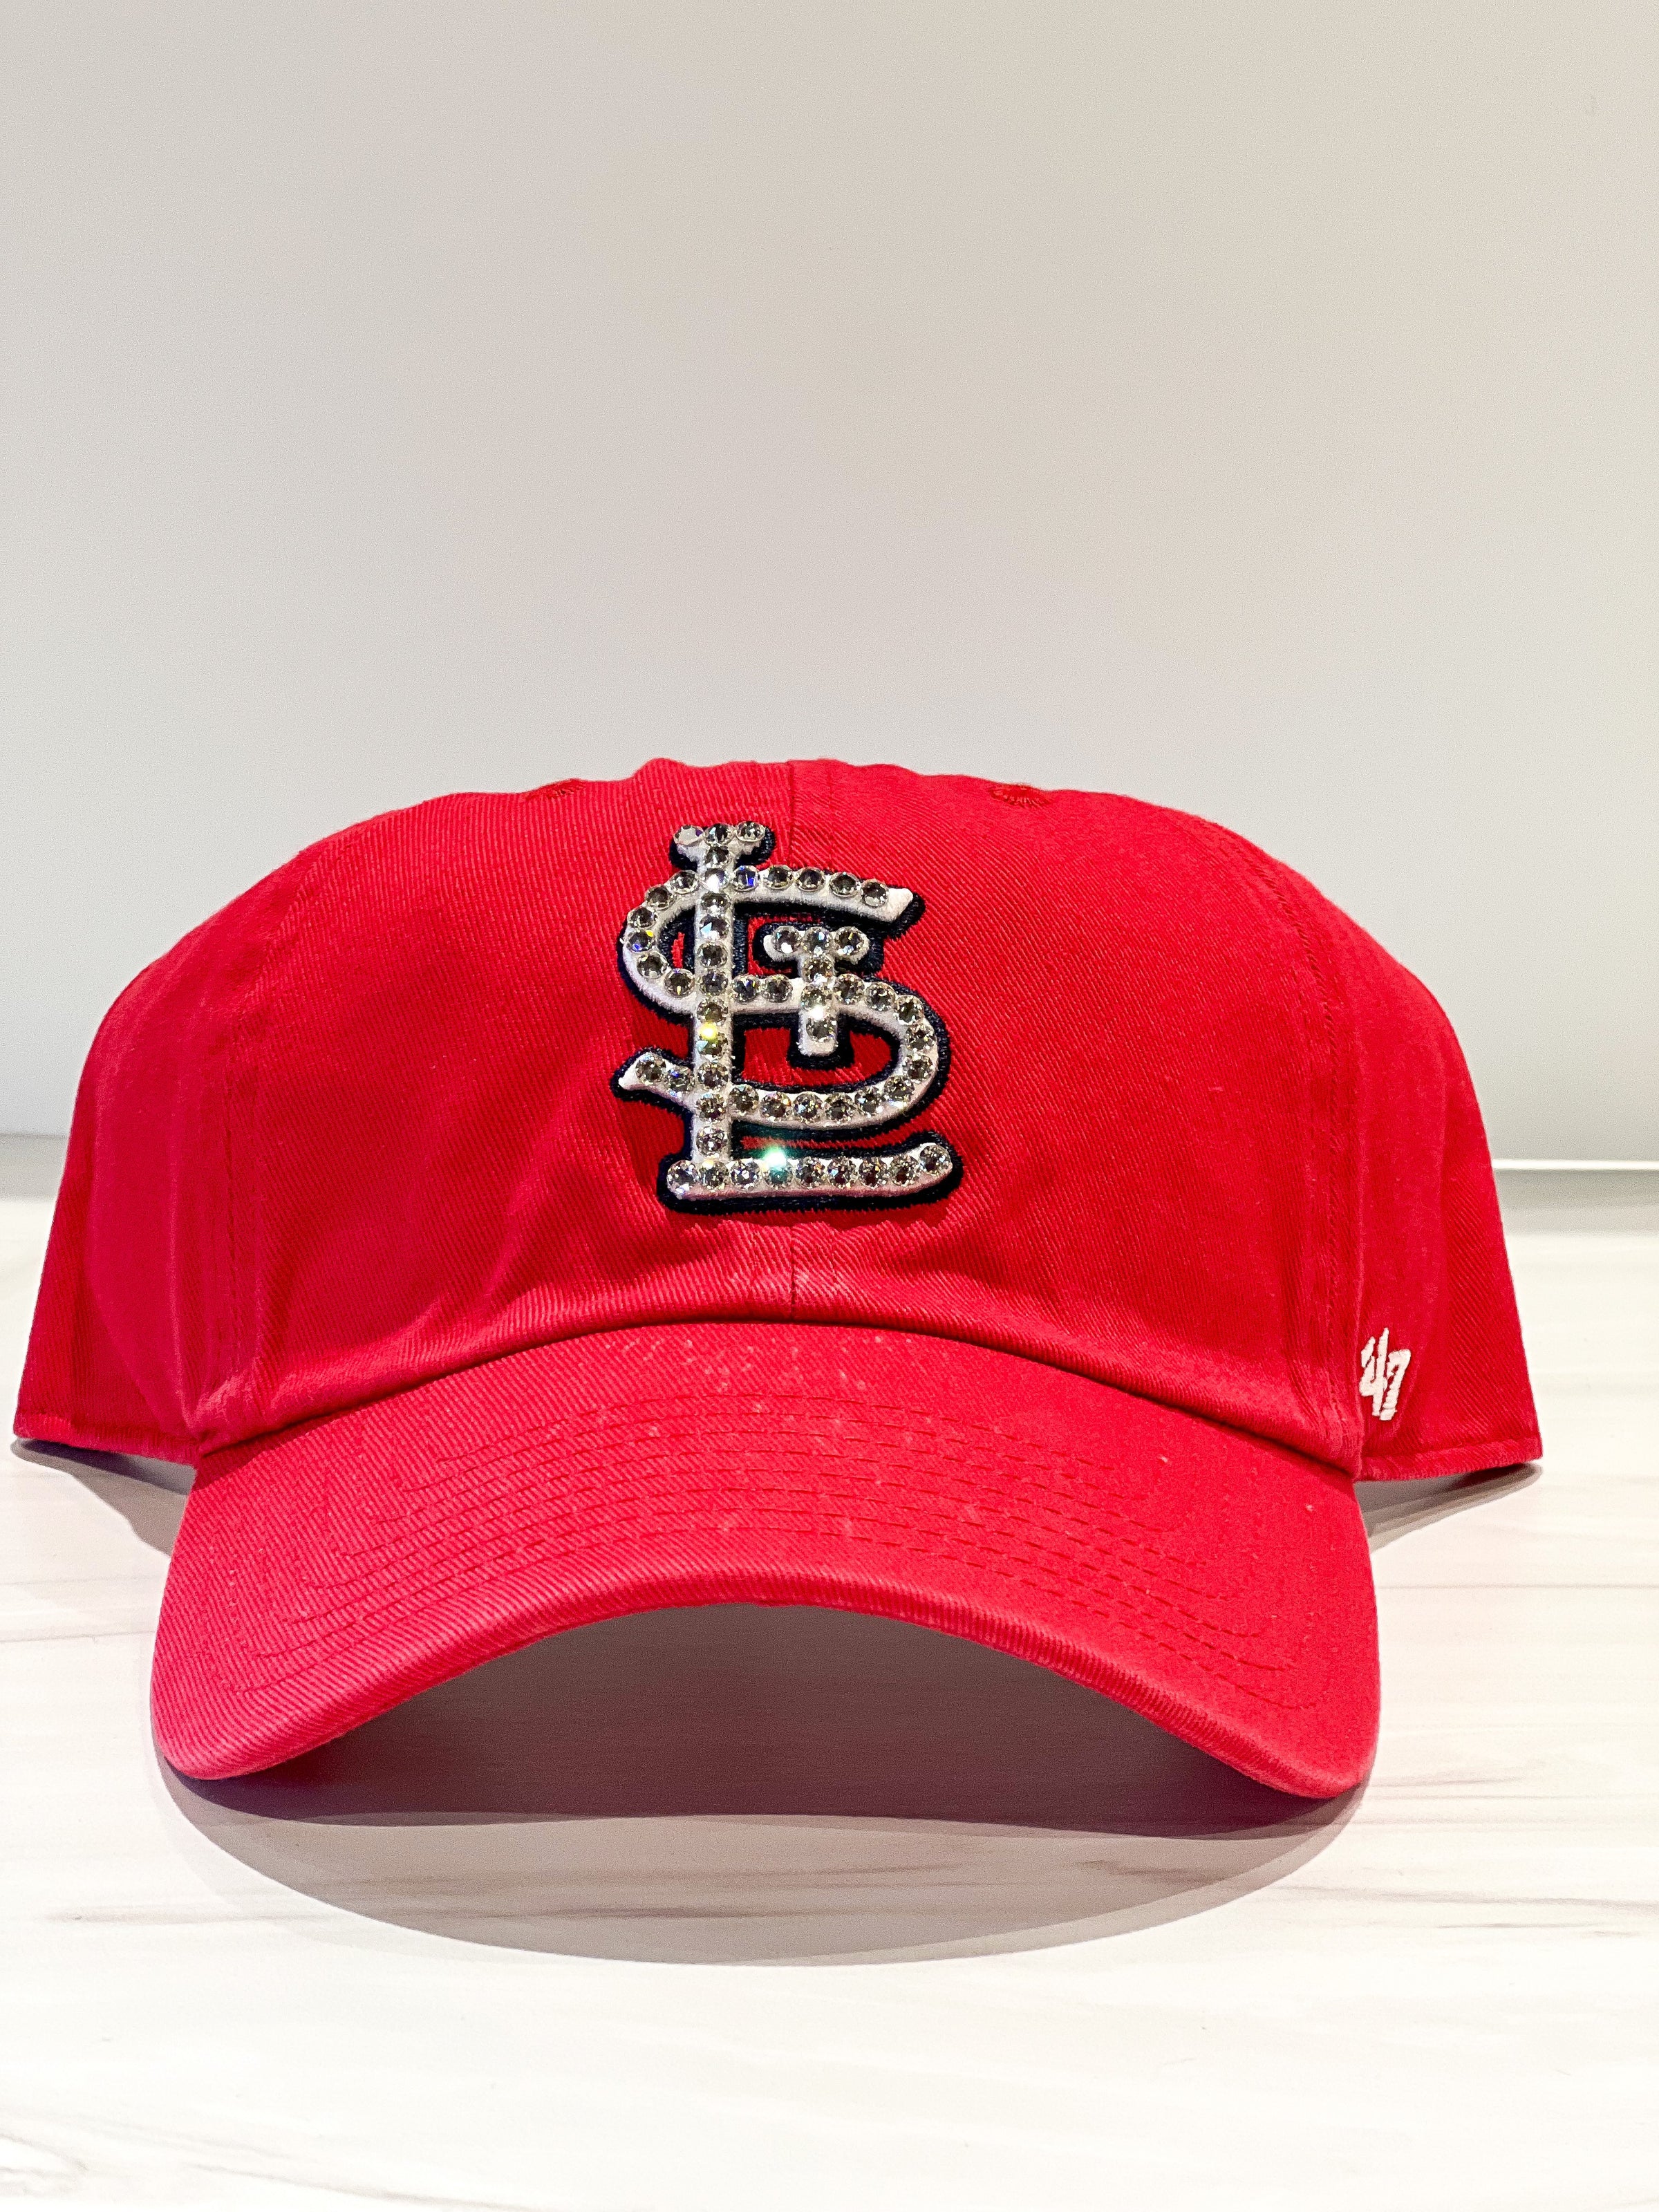 St Louis Cardinals Red Cap 47 Brand Clean Up Adjustable Hat Retro Logo New